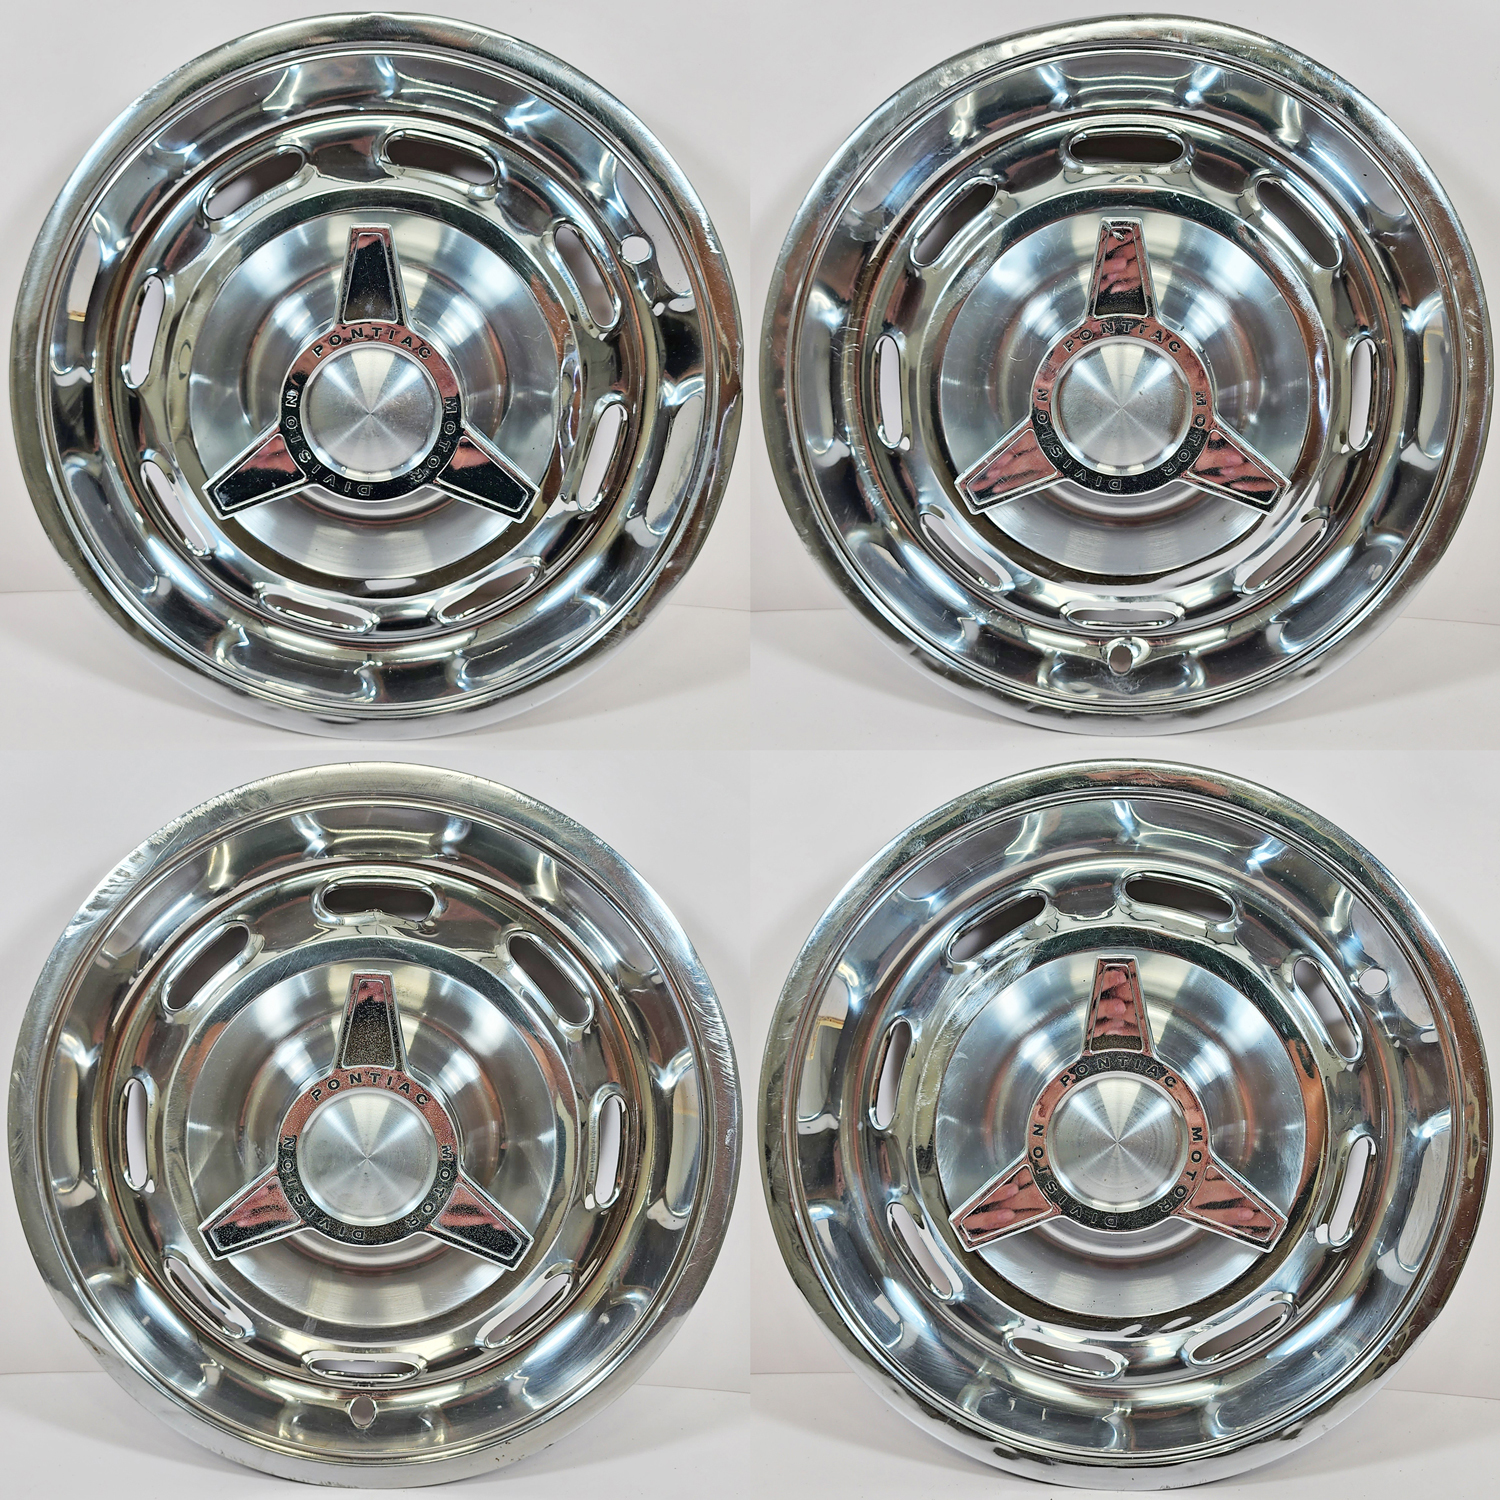 Primary image for 1964 Pontiac Tempest # 5005 14" Hubcaps / Wheel Covers OEM # 09774611 USED SET/4